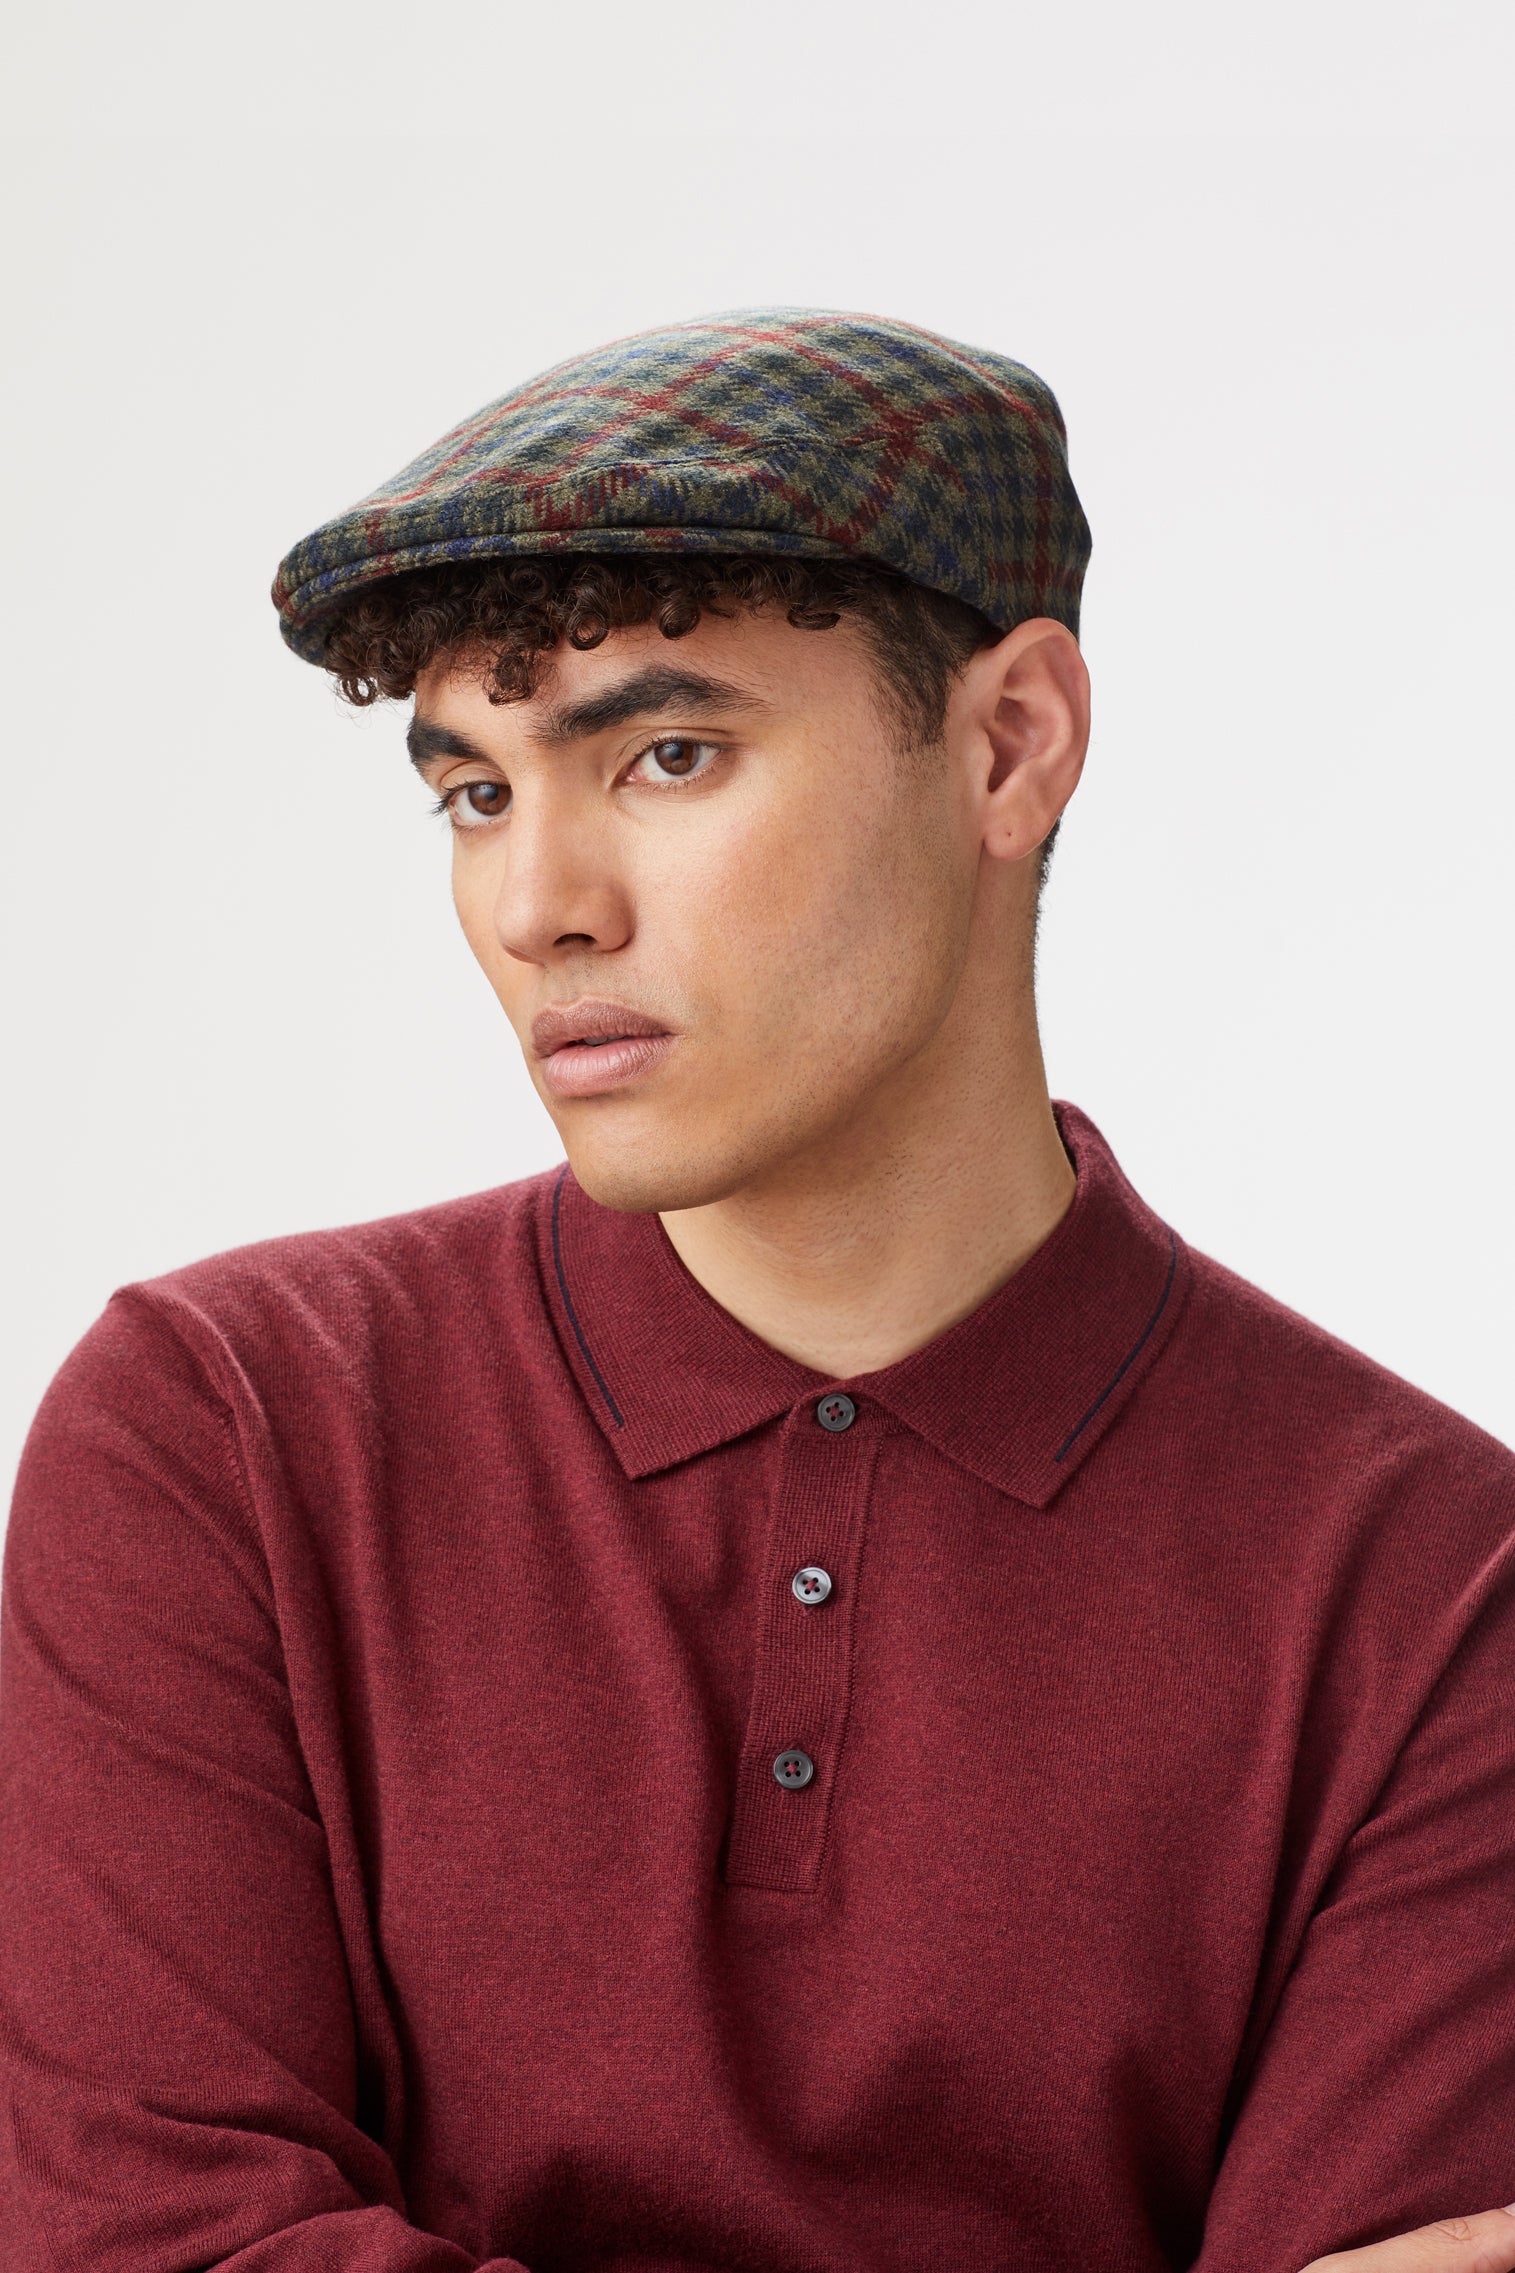 Gill Cashmere Flat Cap - Hats for Oval Face Shapes - Lock & Co. Hatters London UK